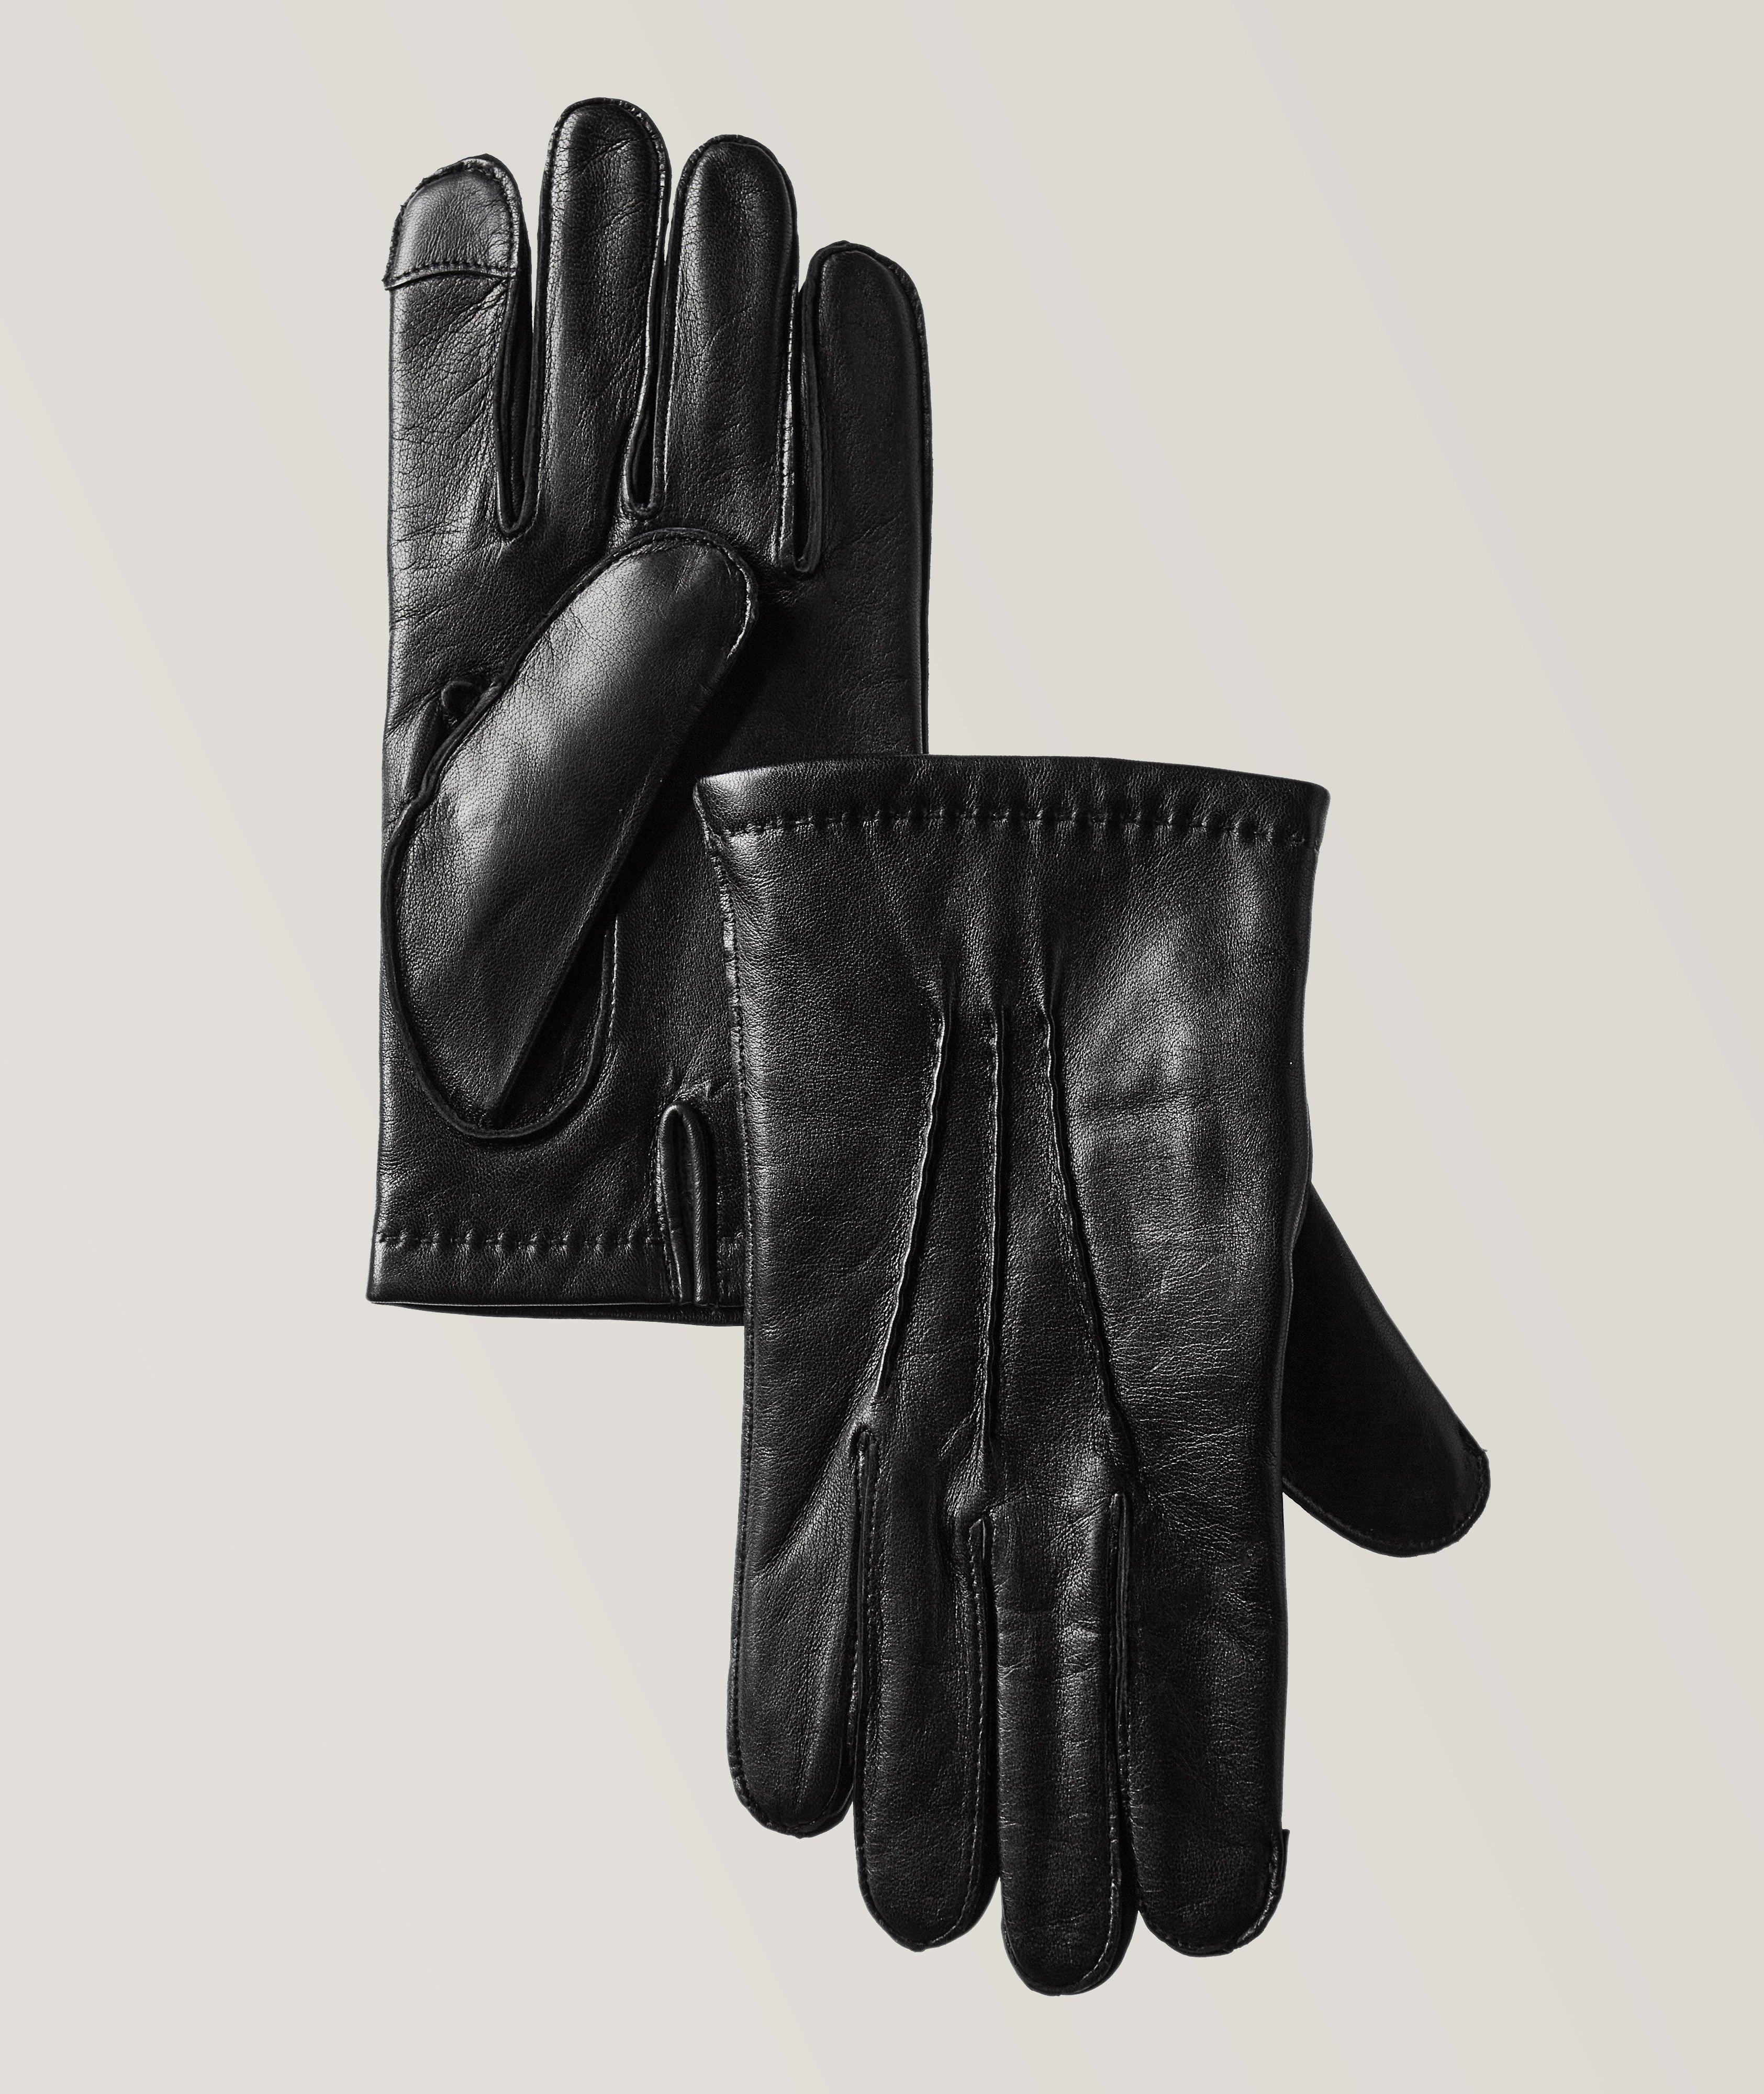 Nappa Cashmere Lined Gloves image 0